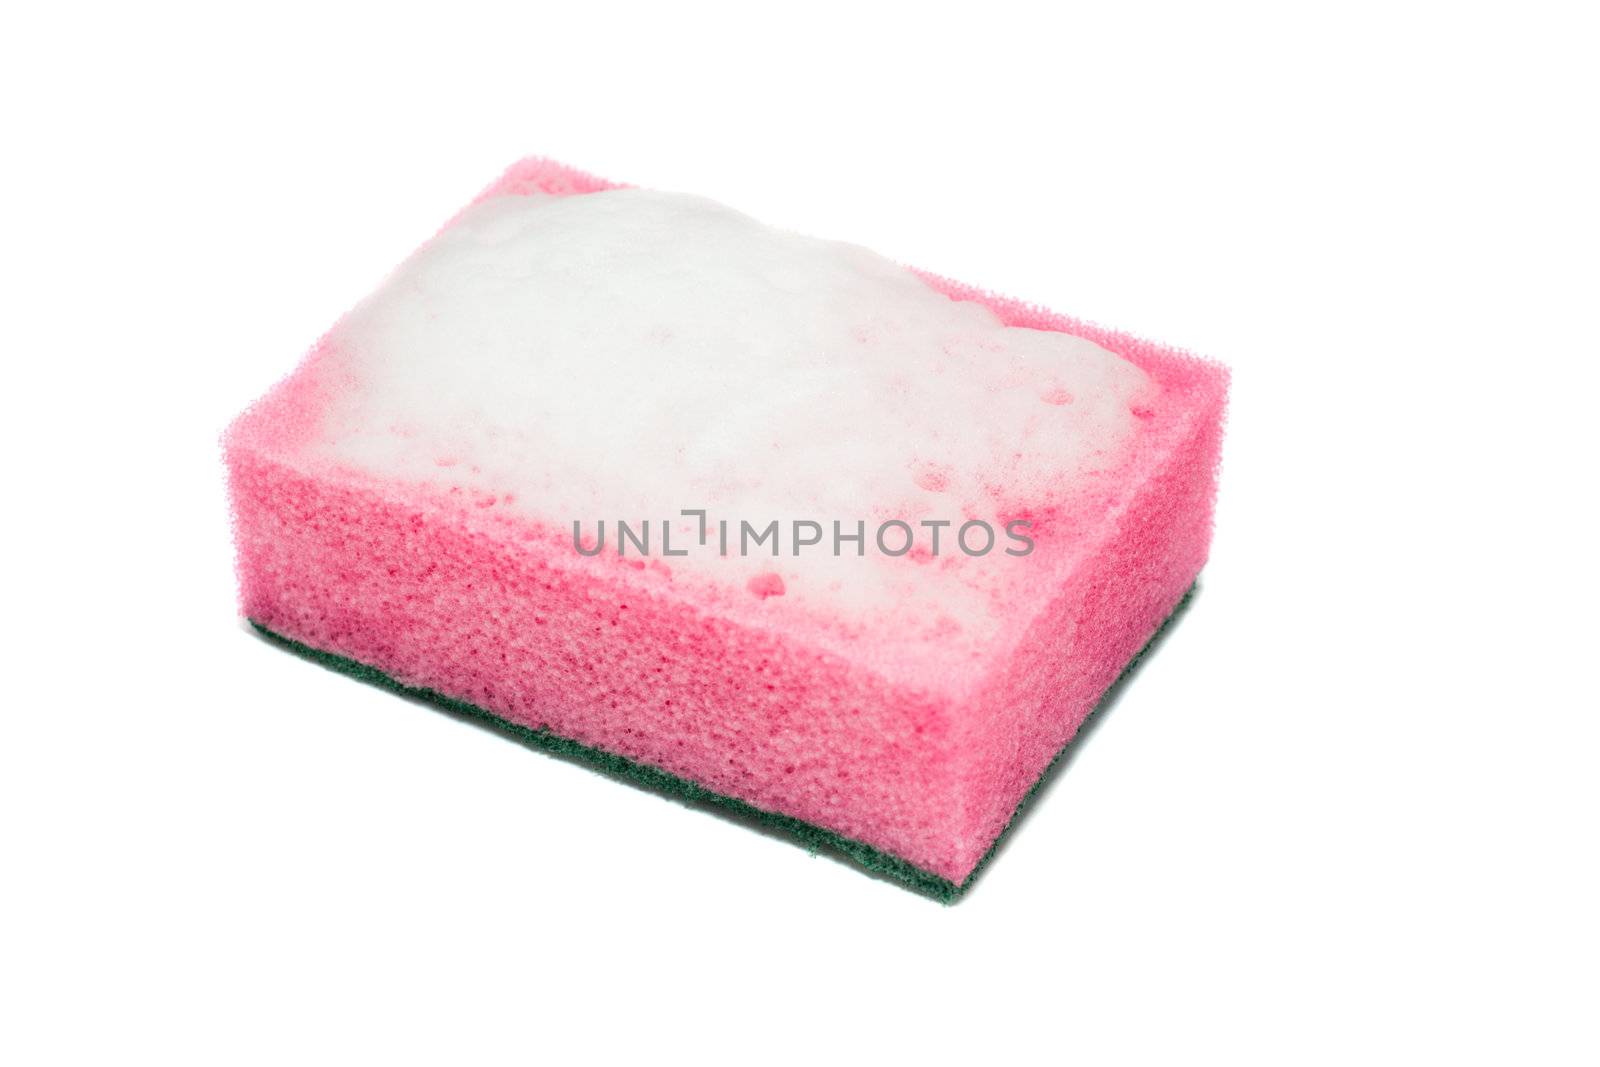 purple sponge with foam, isolated on white